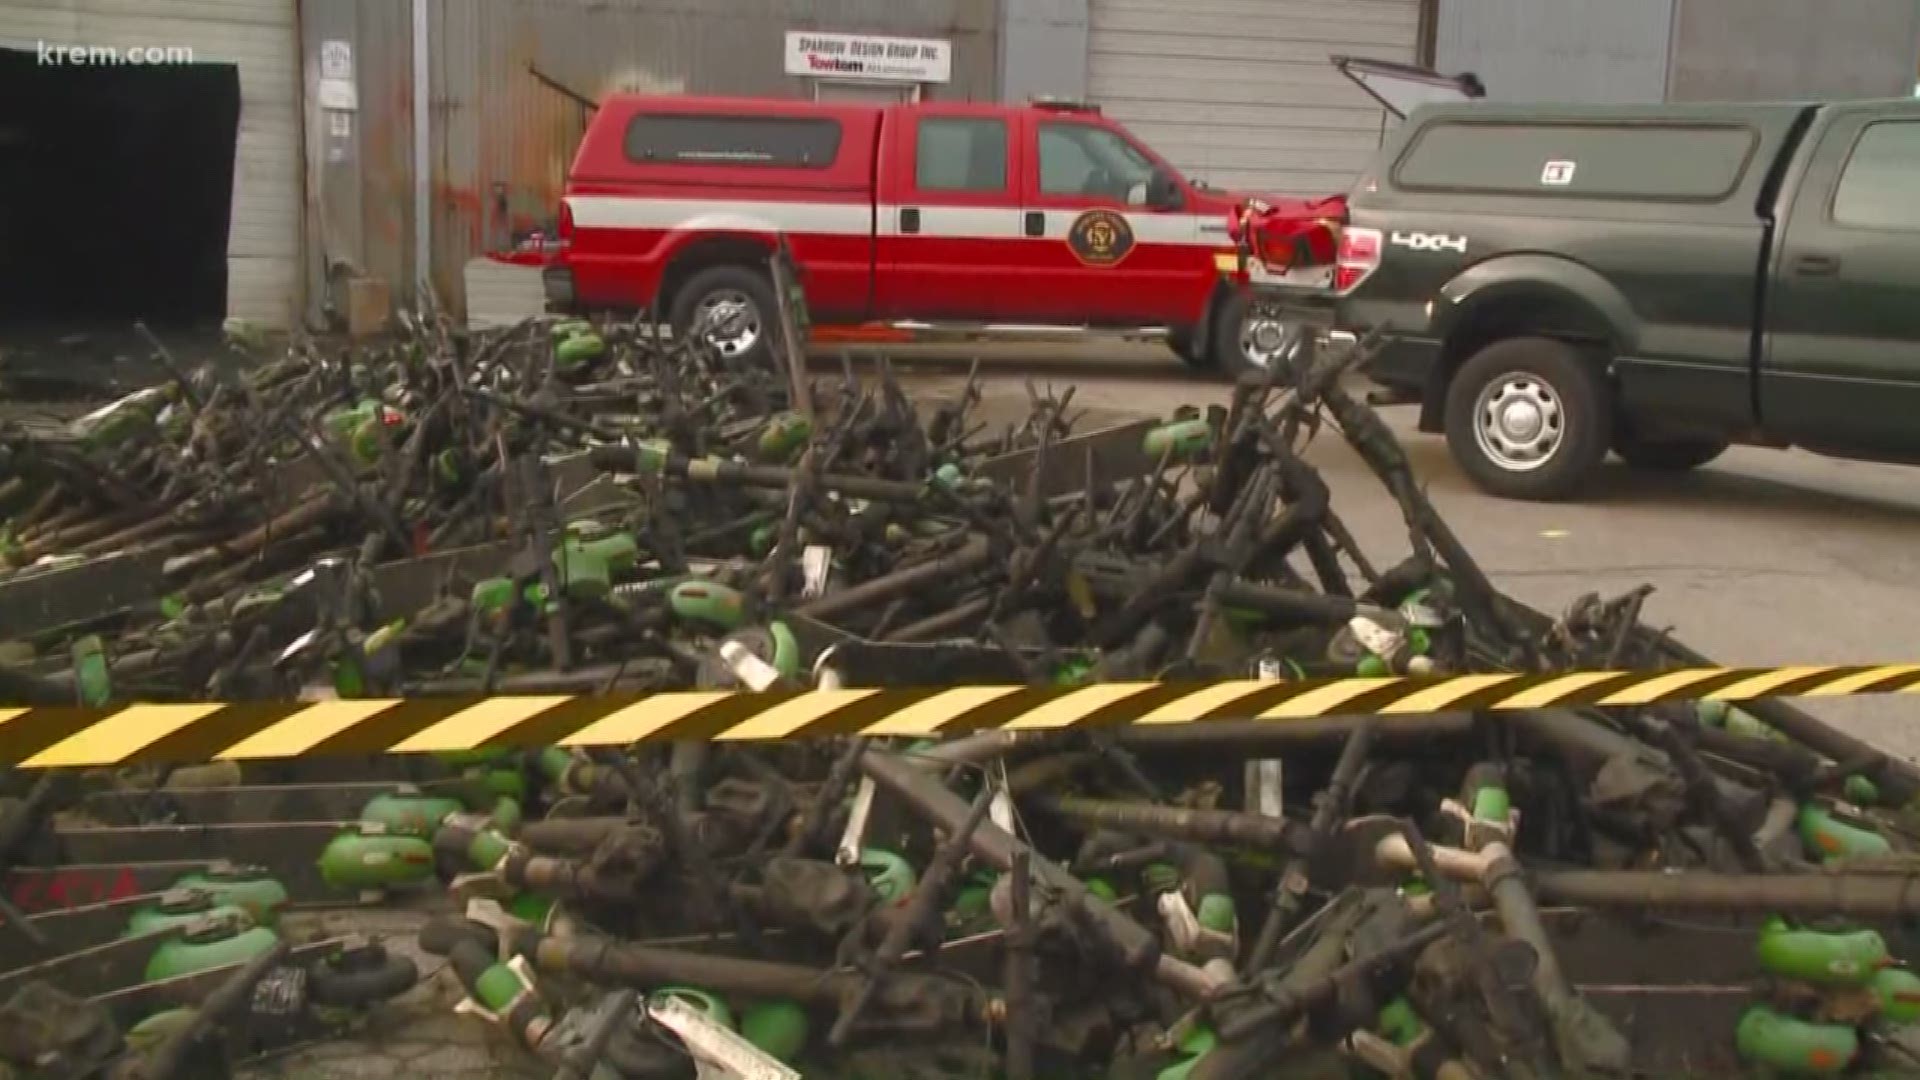 Hundreds of Lime bikes and scooters were burned during maintenance warehouse fire on Sunday. The Spokane Valley Fire Department says they are likely destroyed.